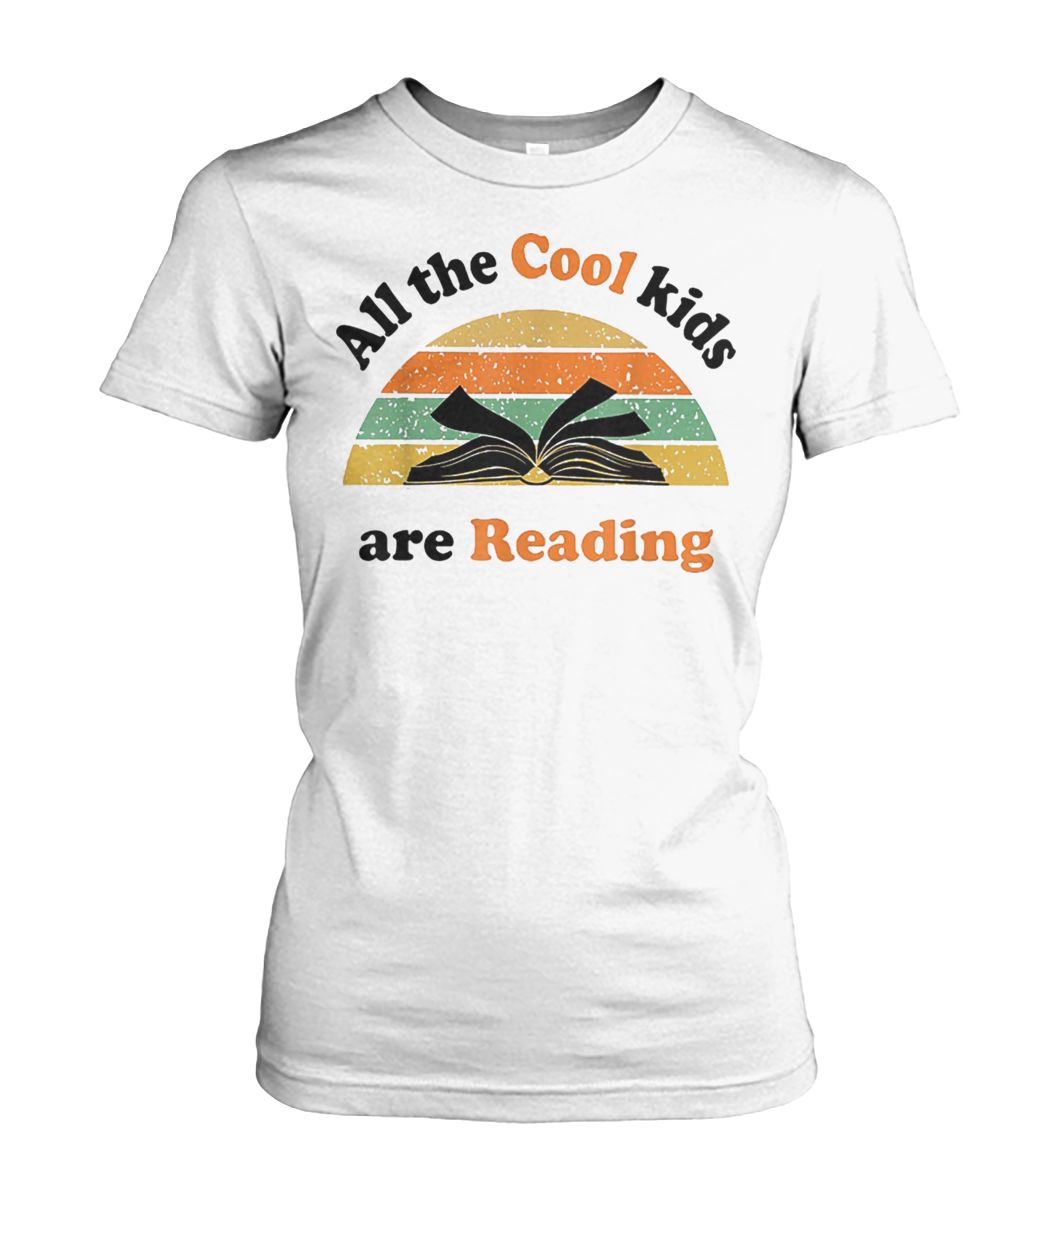 All the cool kids are reading vintage women's crew tee